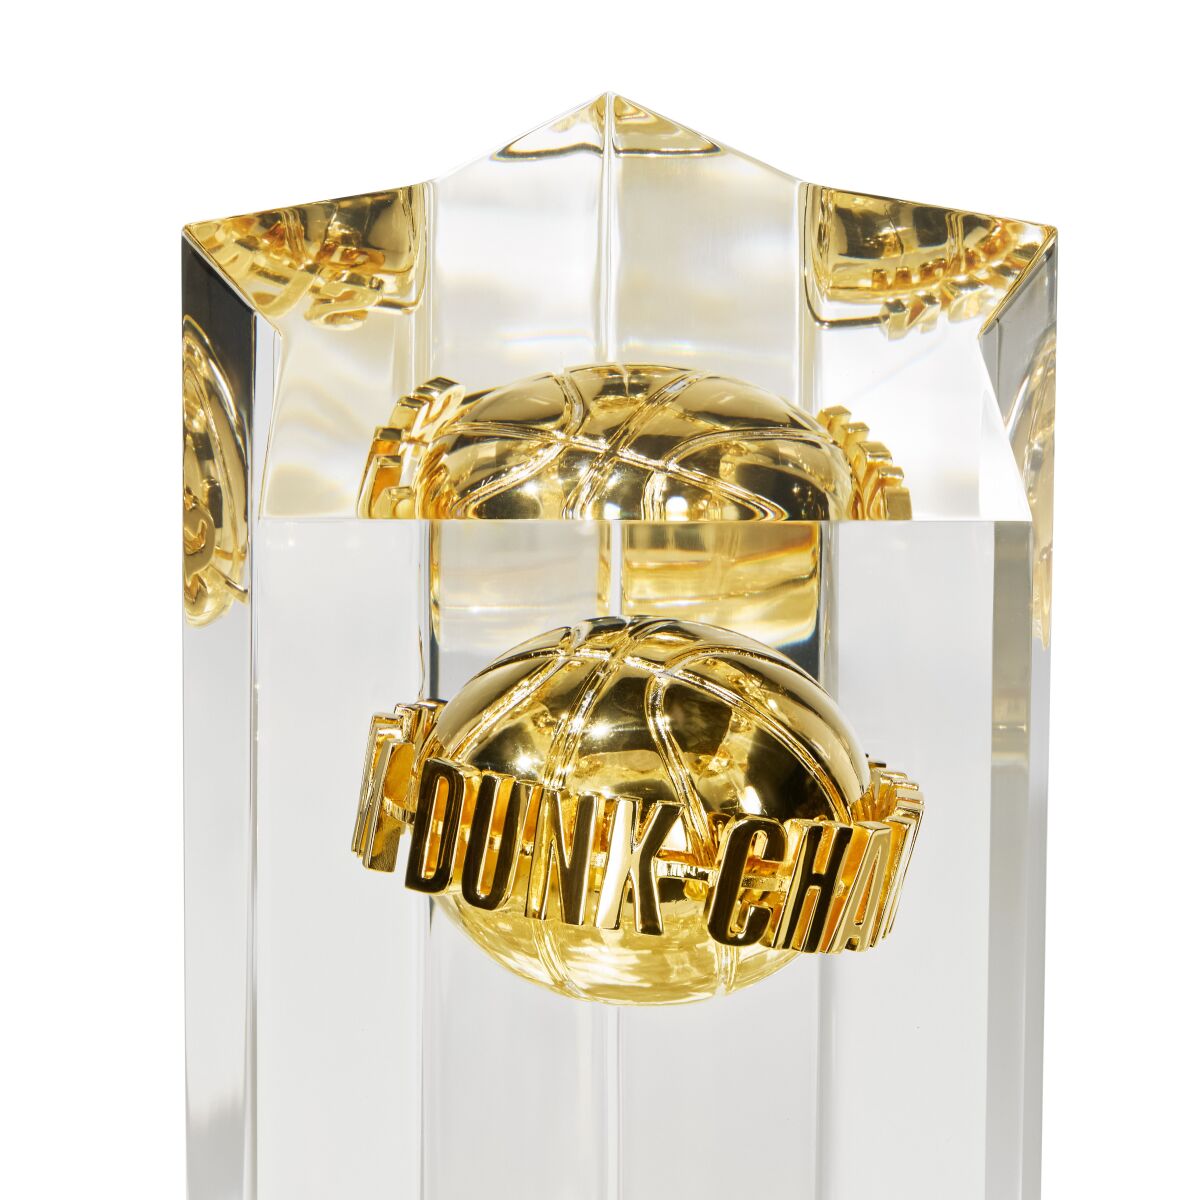 The All-Star slam dunk winner's trophy features a 24-karat basketball embedded in the crystal column.